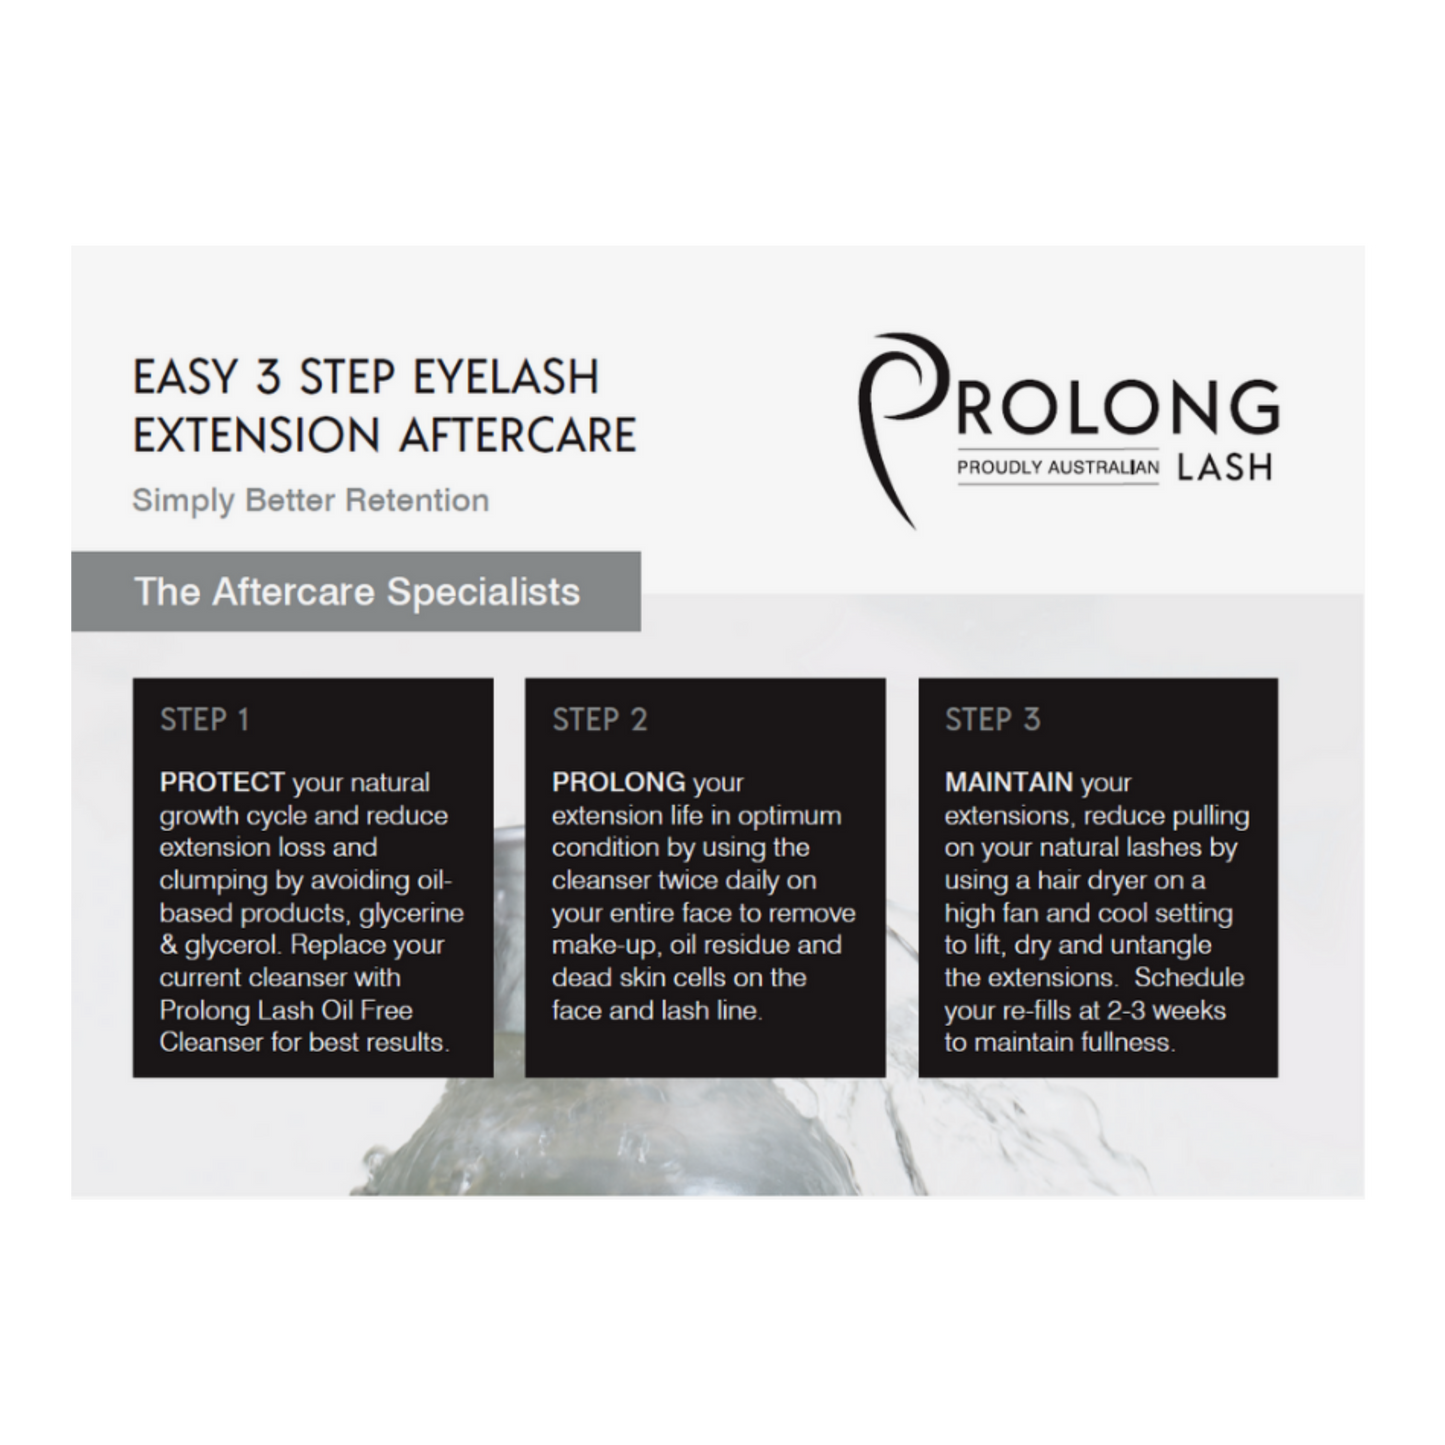 Postcard with information on 3 step process to caring for eyelash extensions